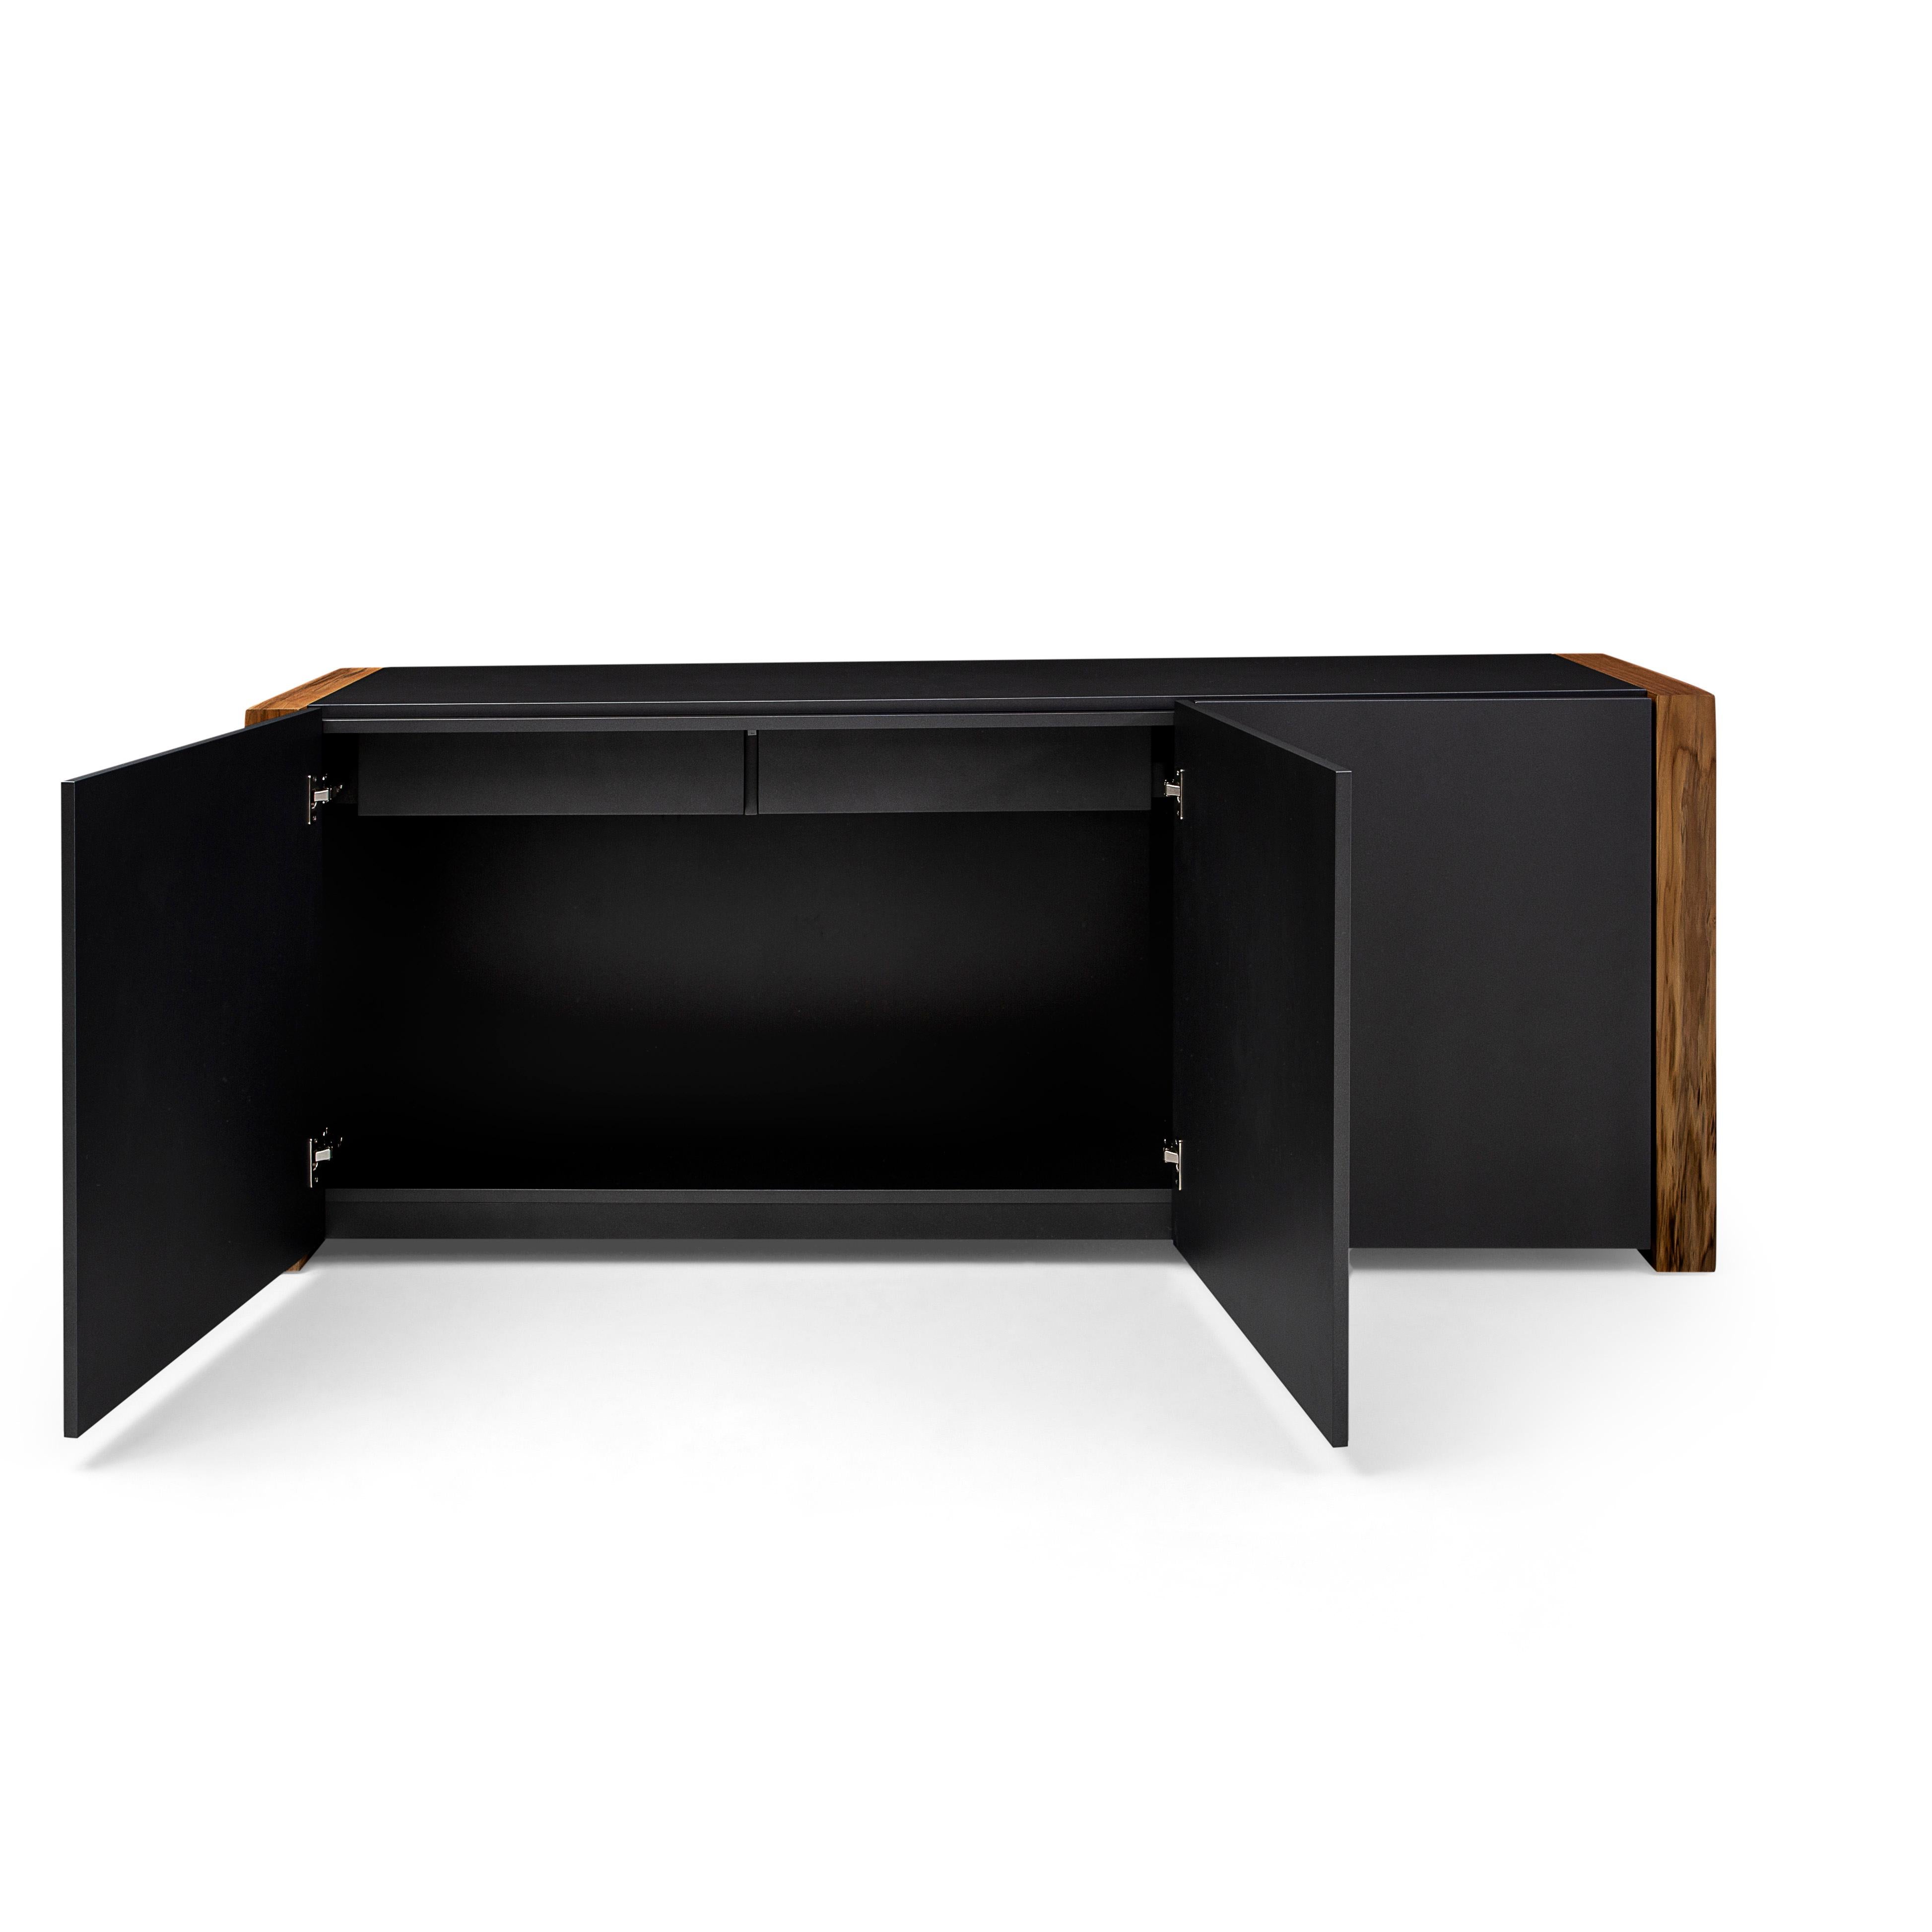 Masp Sideboard in Graphite Finish and Teak Wood Finish End Frames In New Condition For Sale In Miami, FL